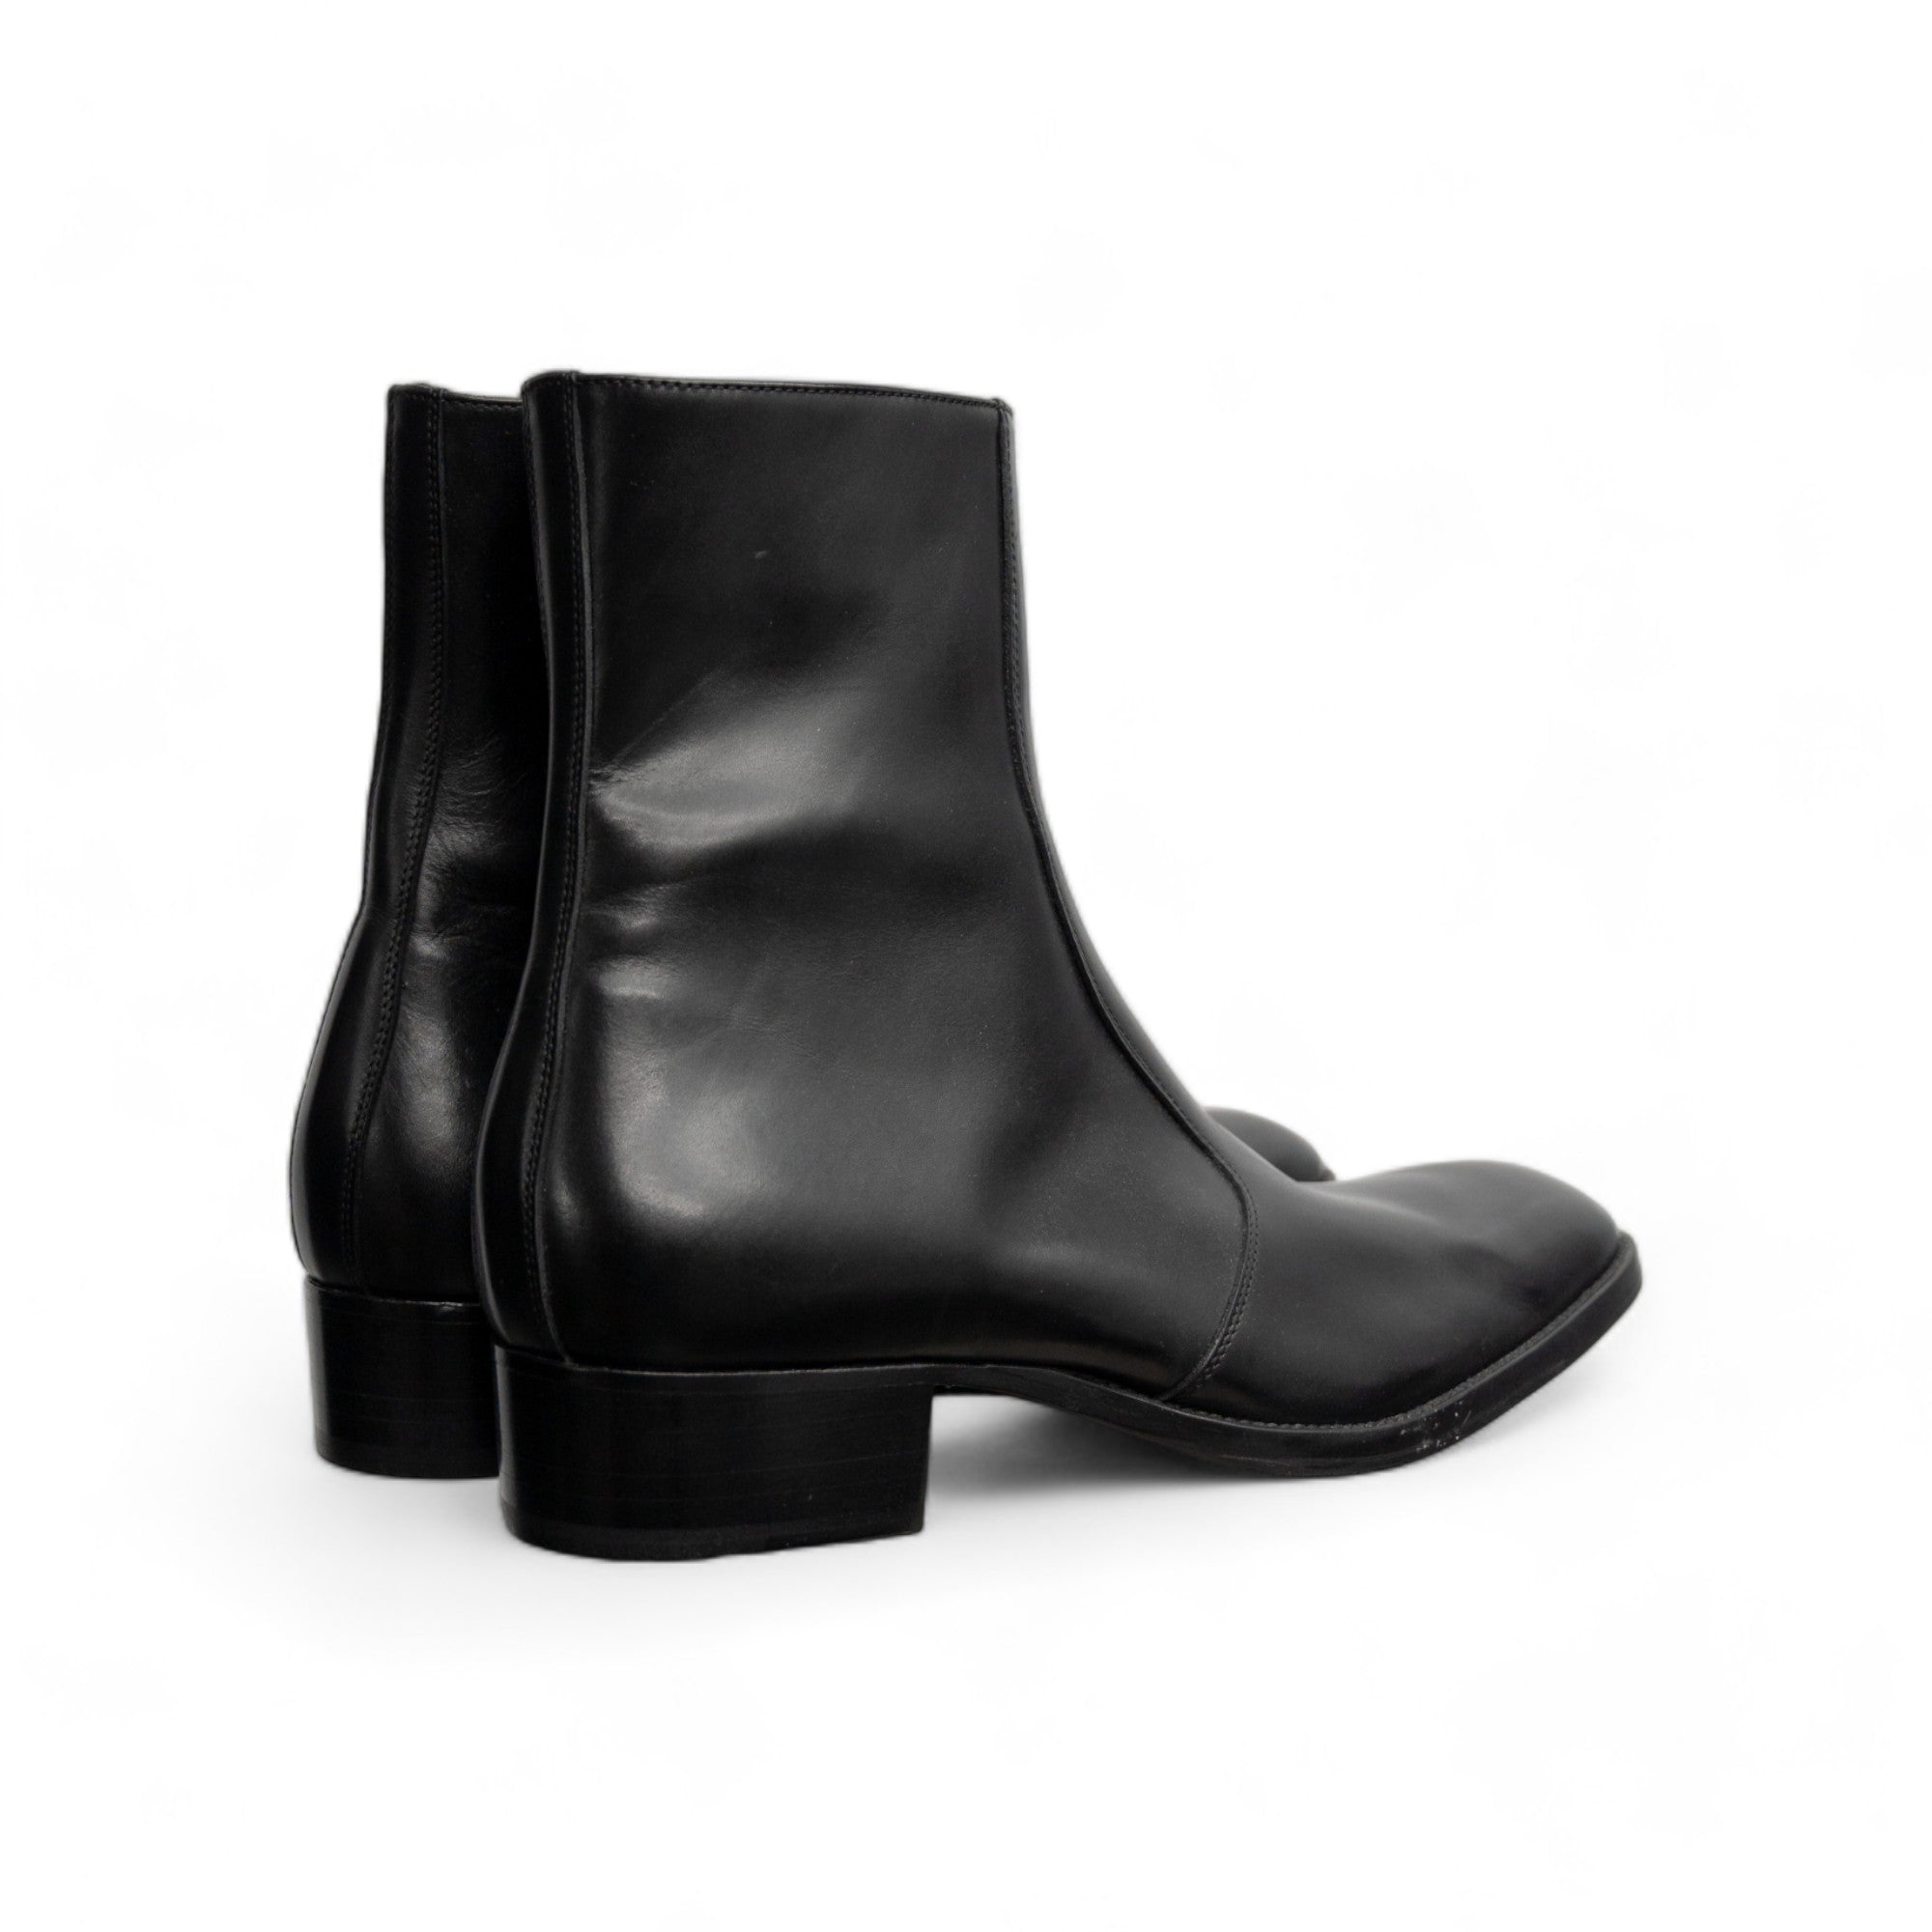 FROMTHEFIRST LUCA 40MM SIDE ZIP BOOT - BLACK LEATHER